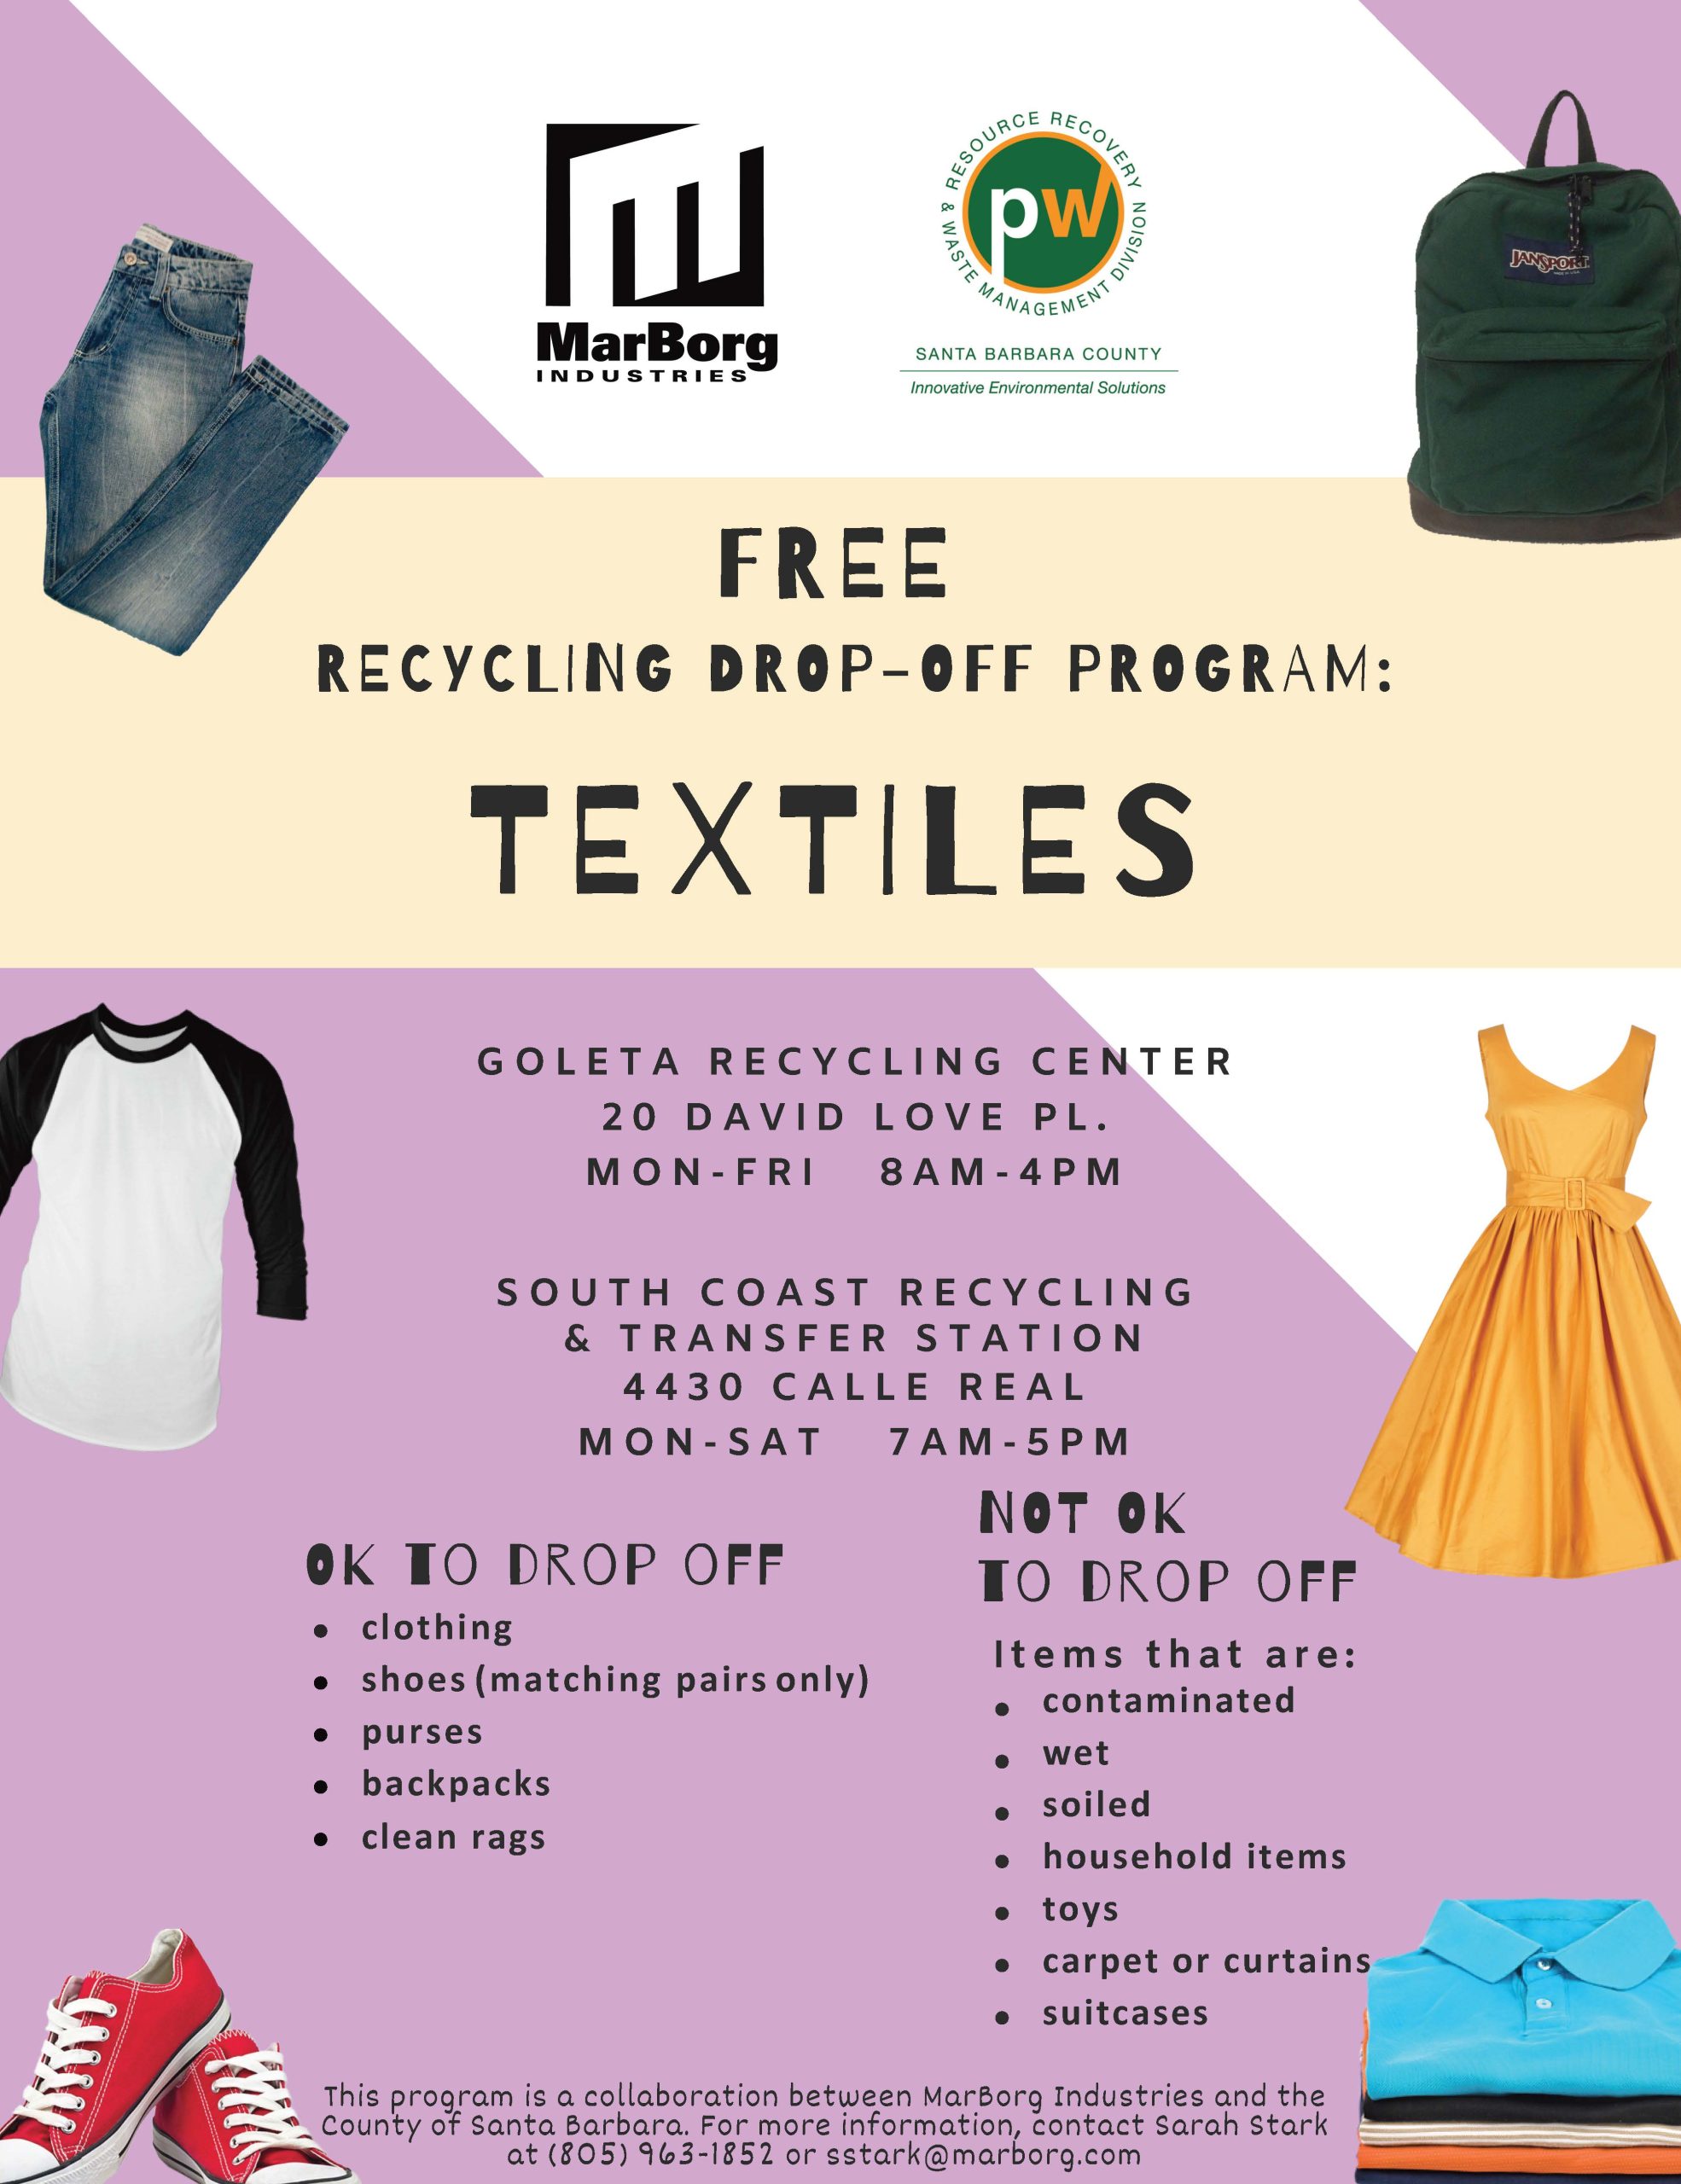 TEXTILE DONATIONS AND RECYCLING PROGRAM